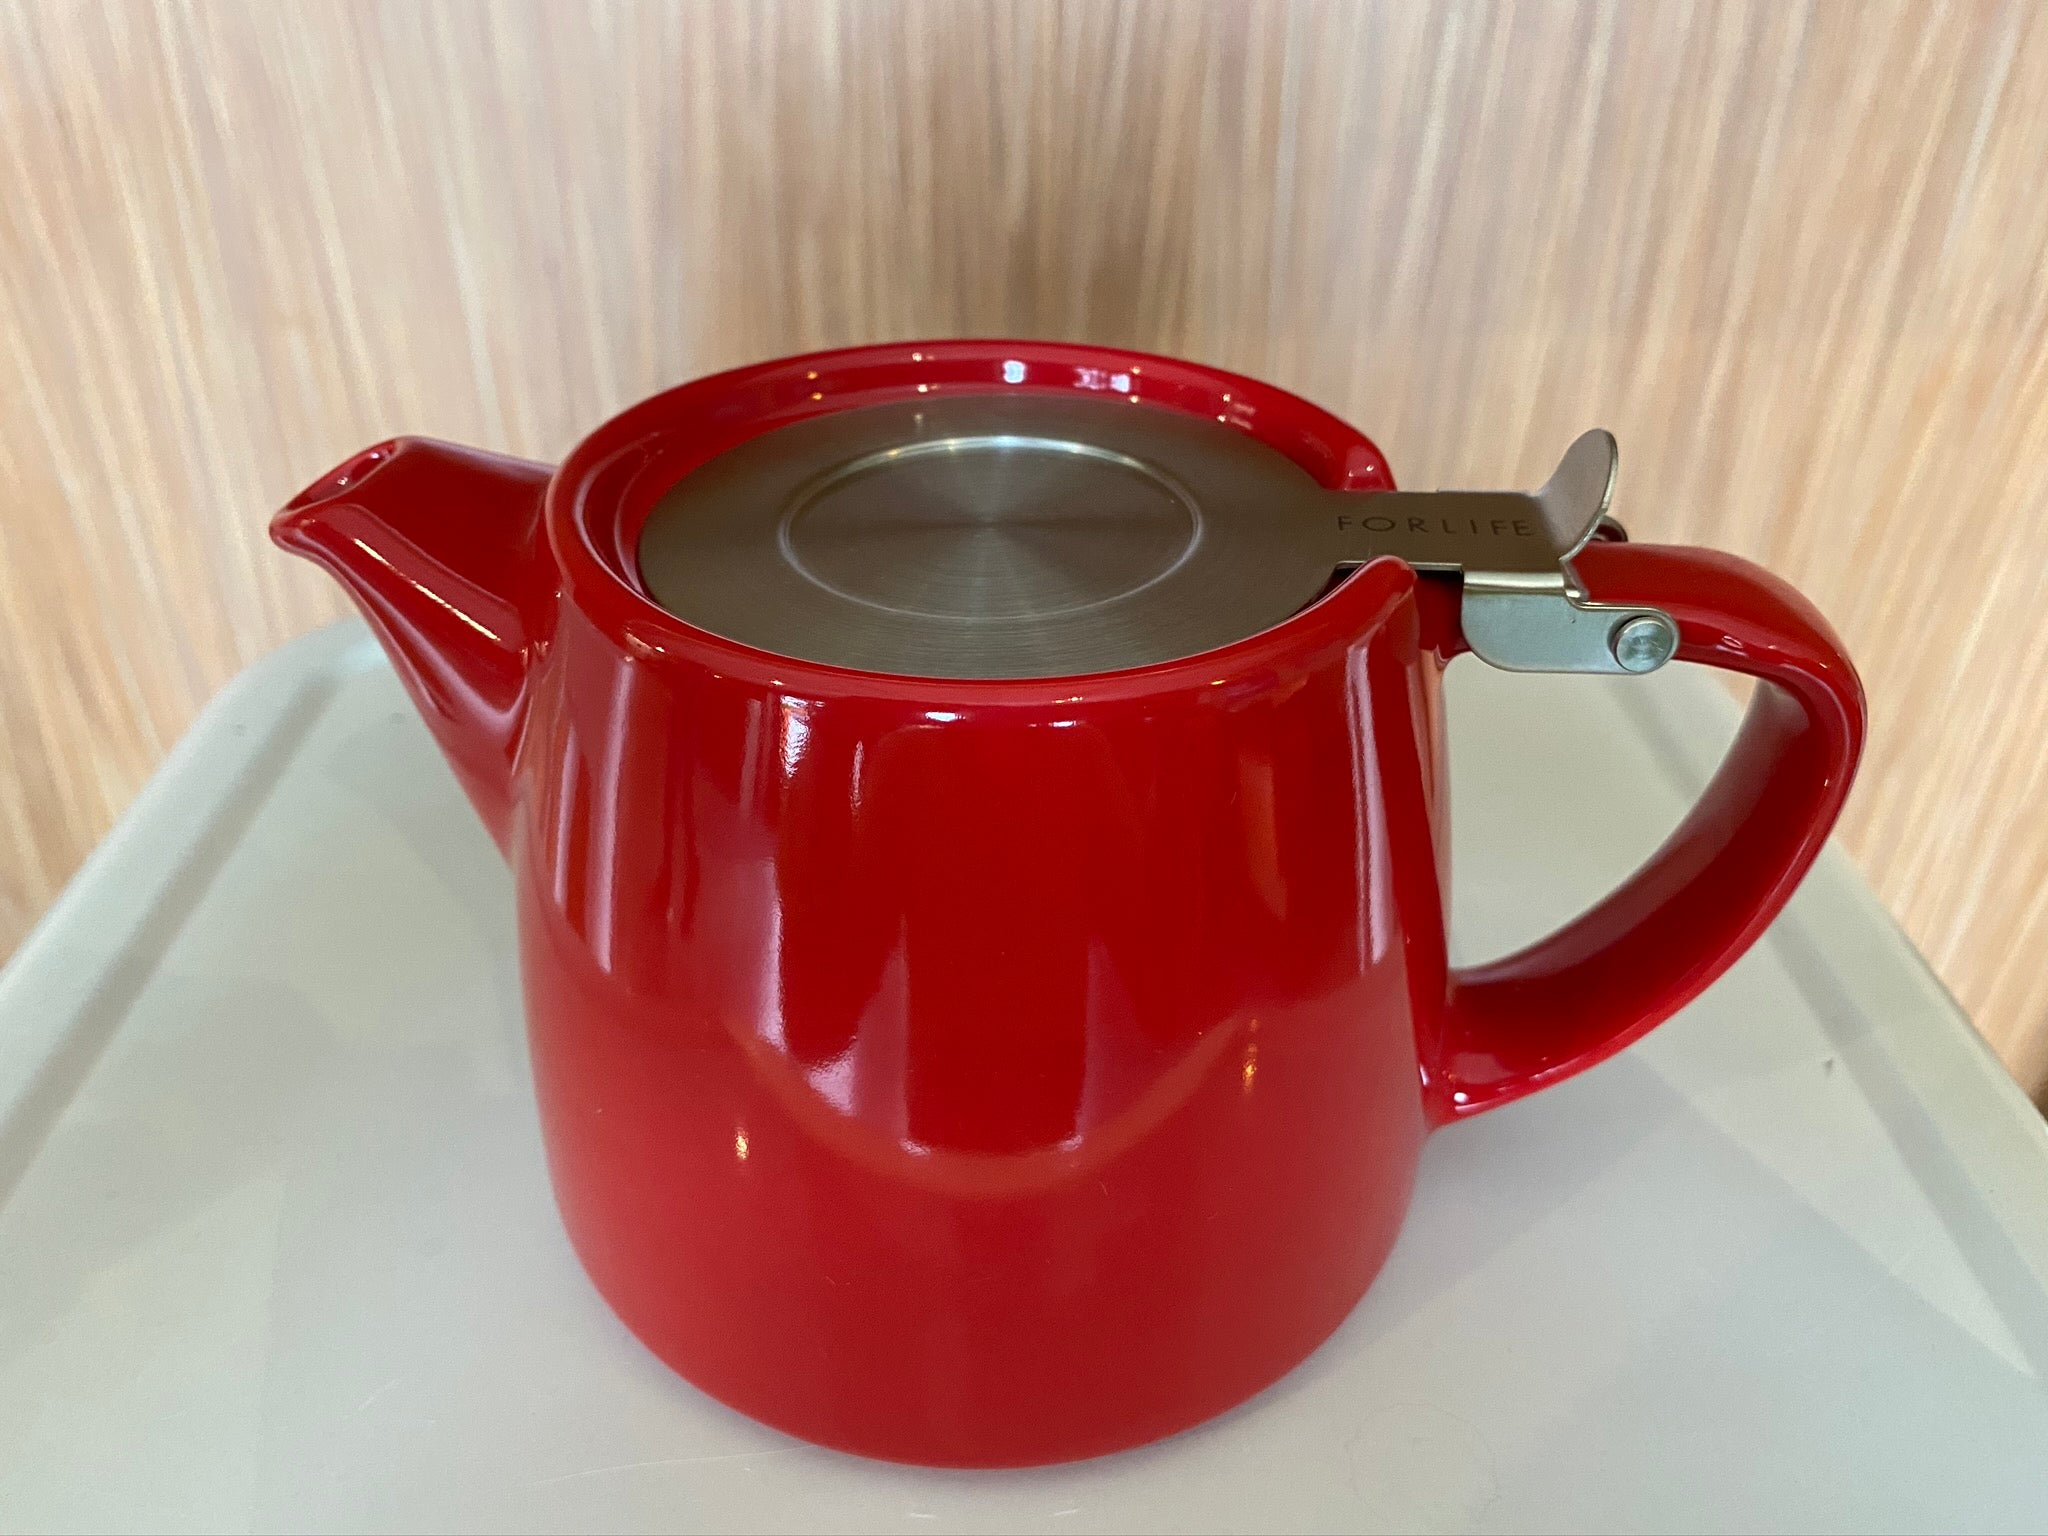 Red stump teapot, For Life brand